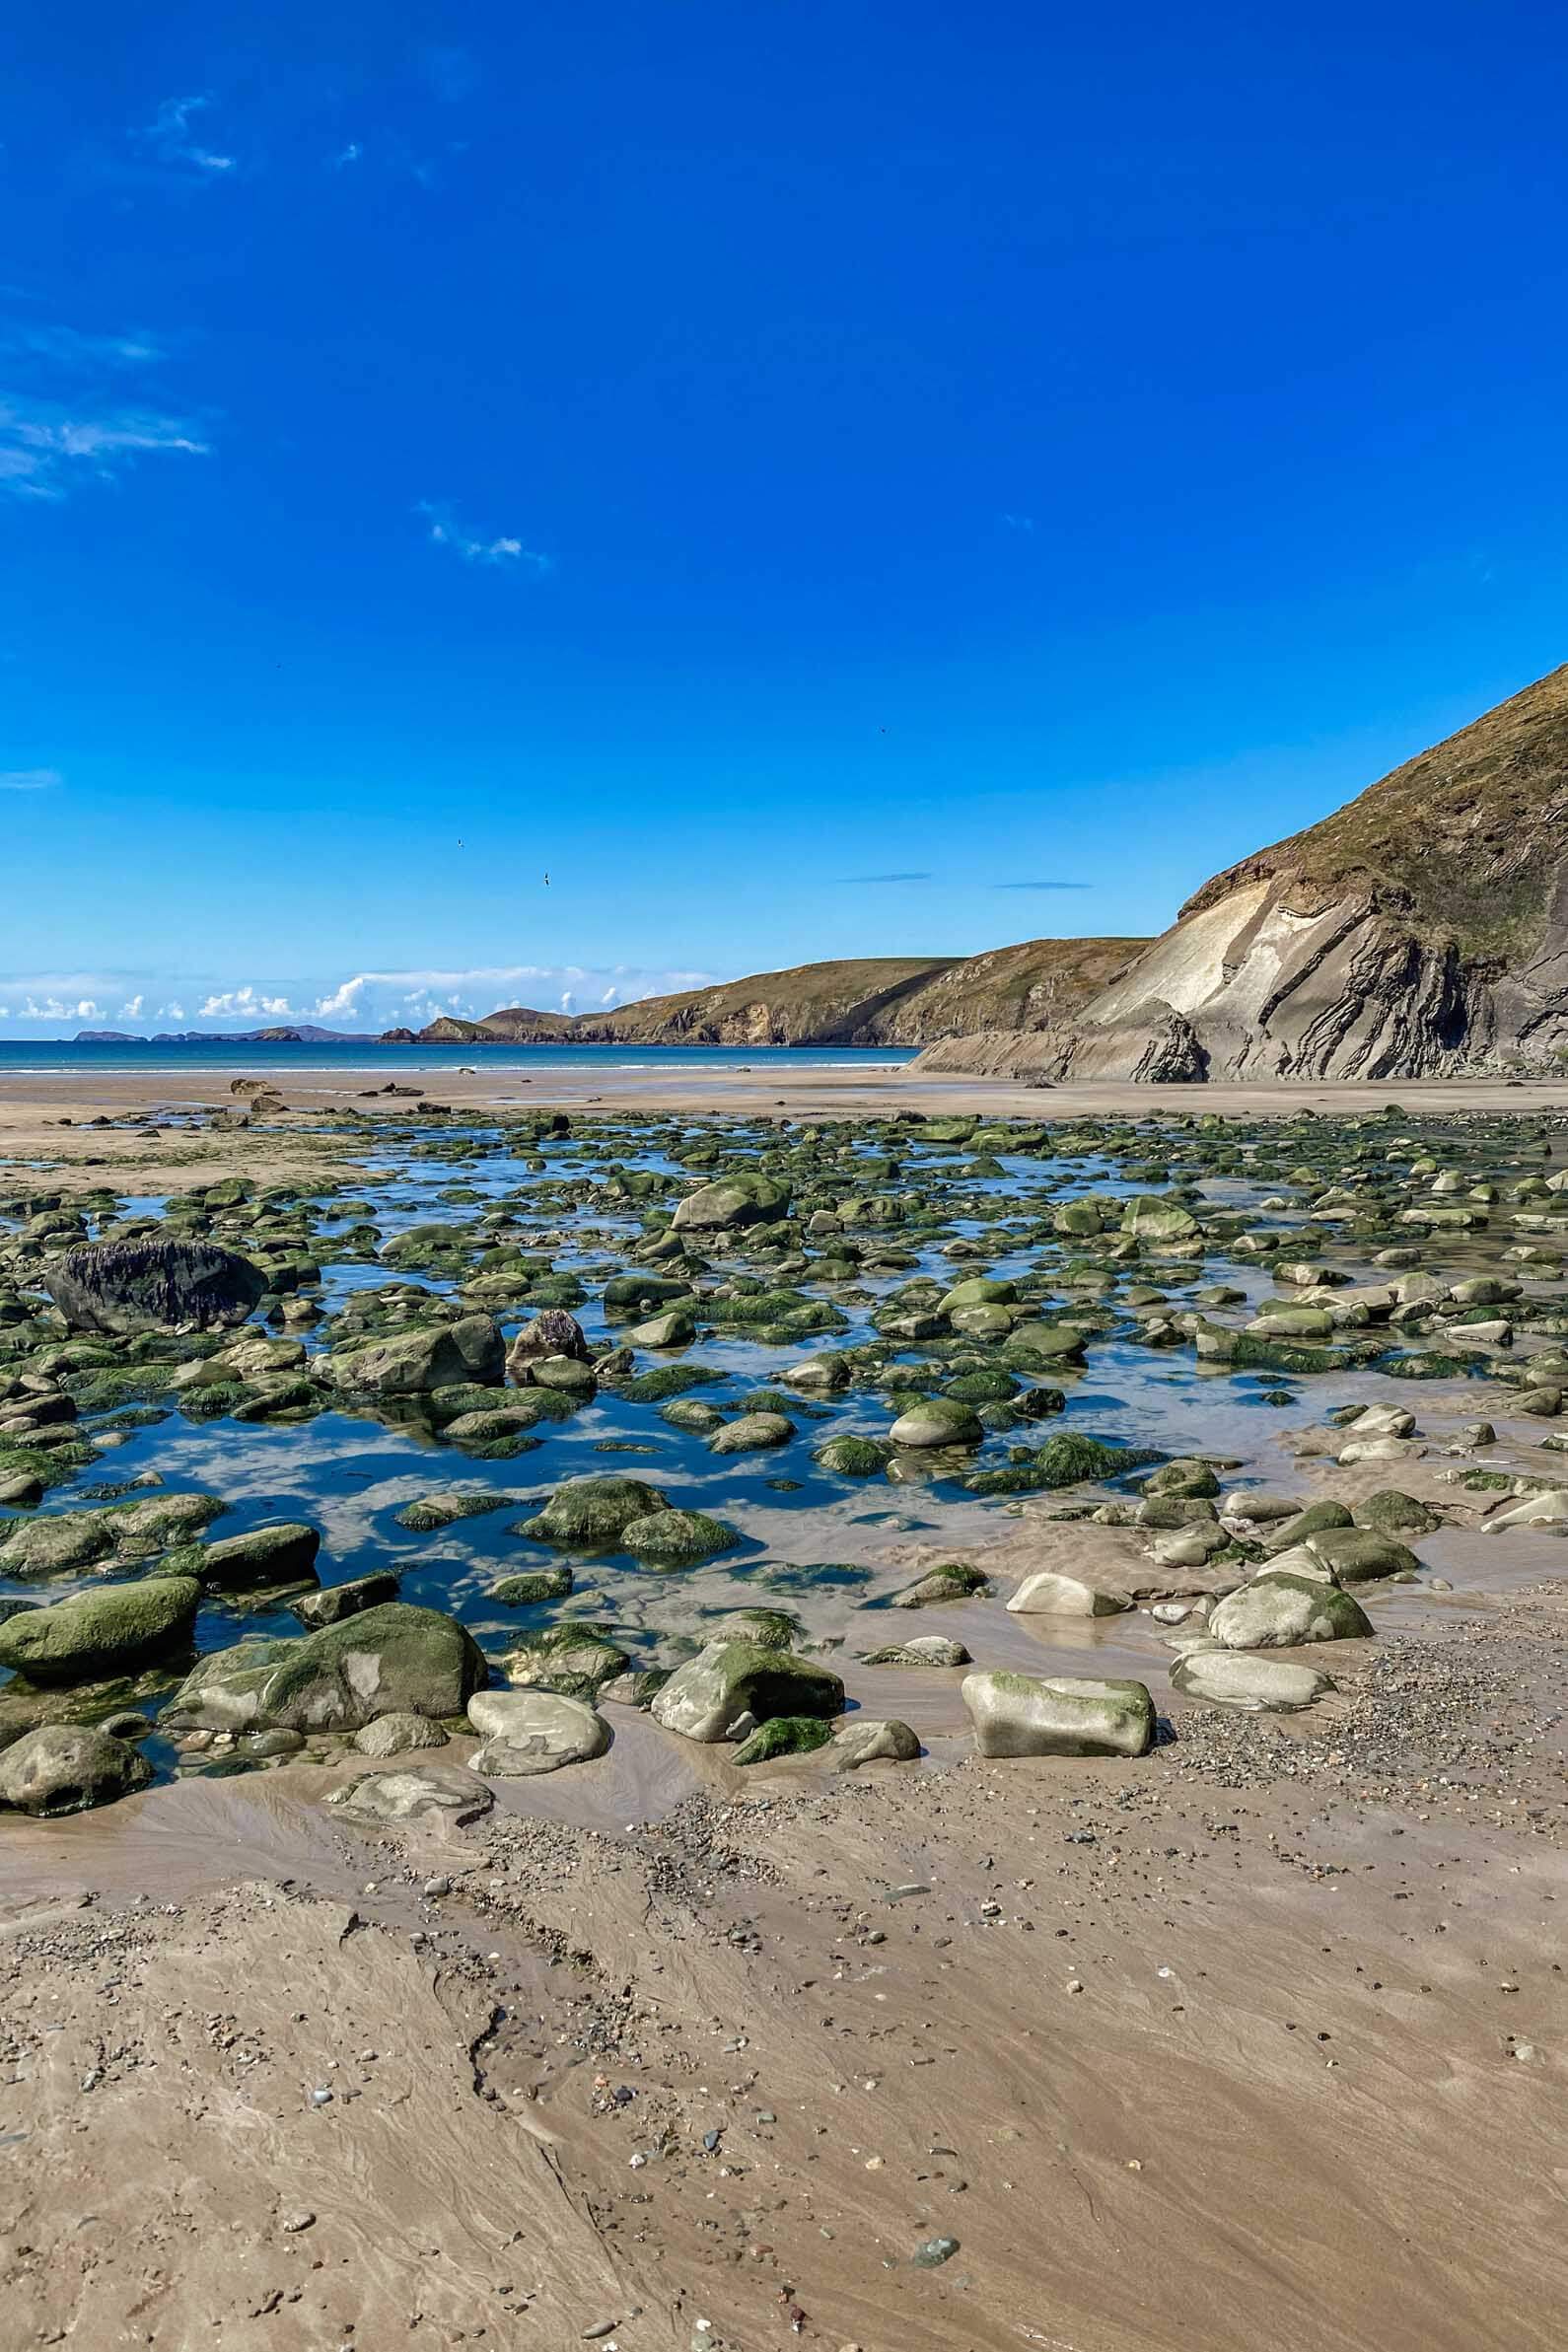 A complete guide to the Pembrokeshire Coast National Park, Wales - the best places to visit in Pembrokeshire